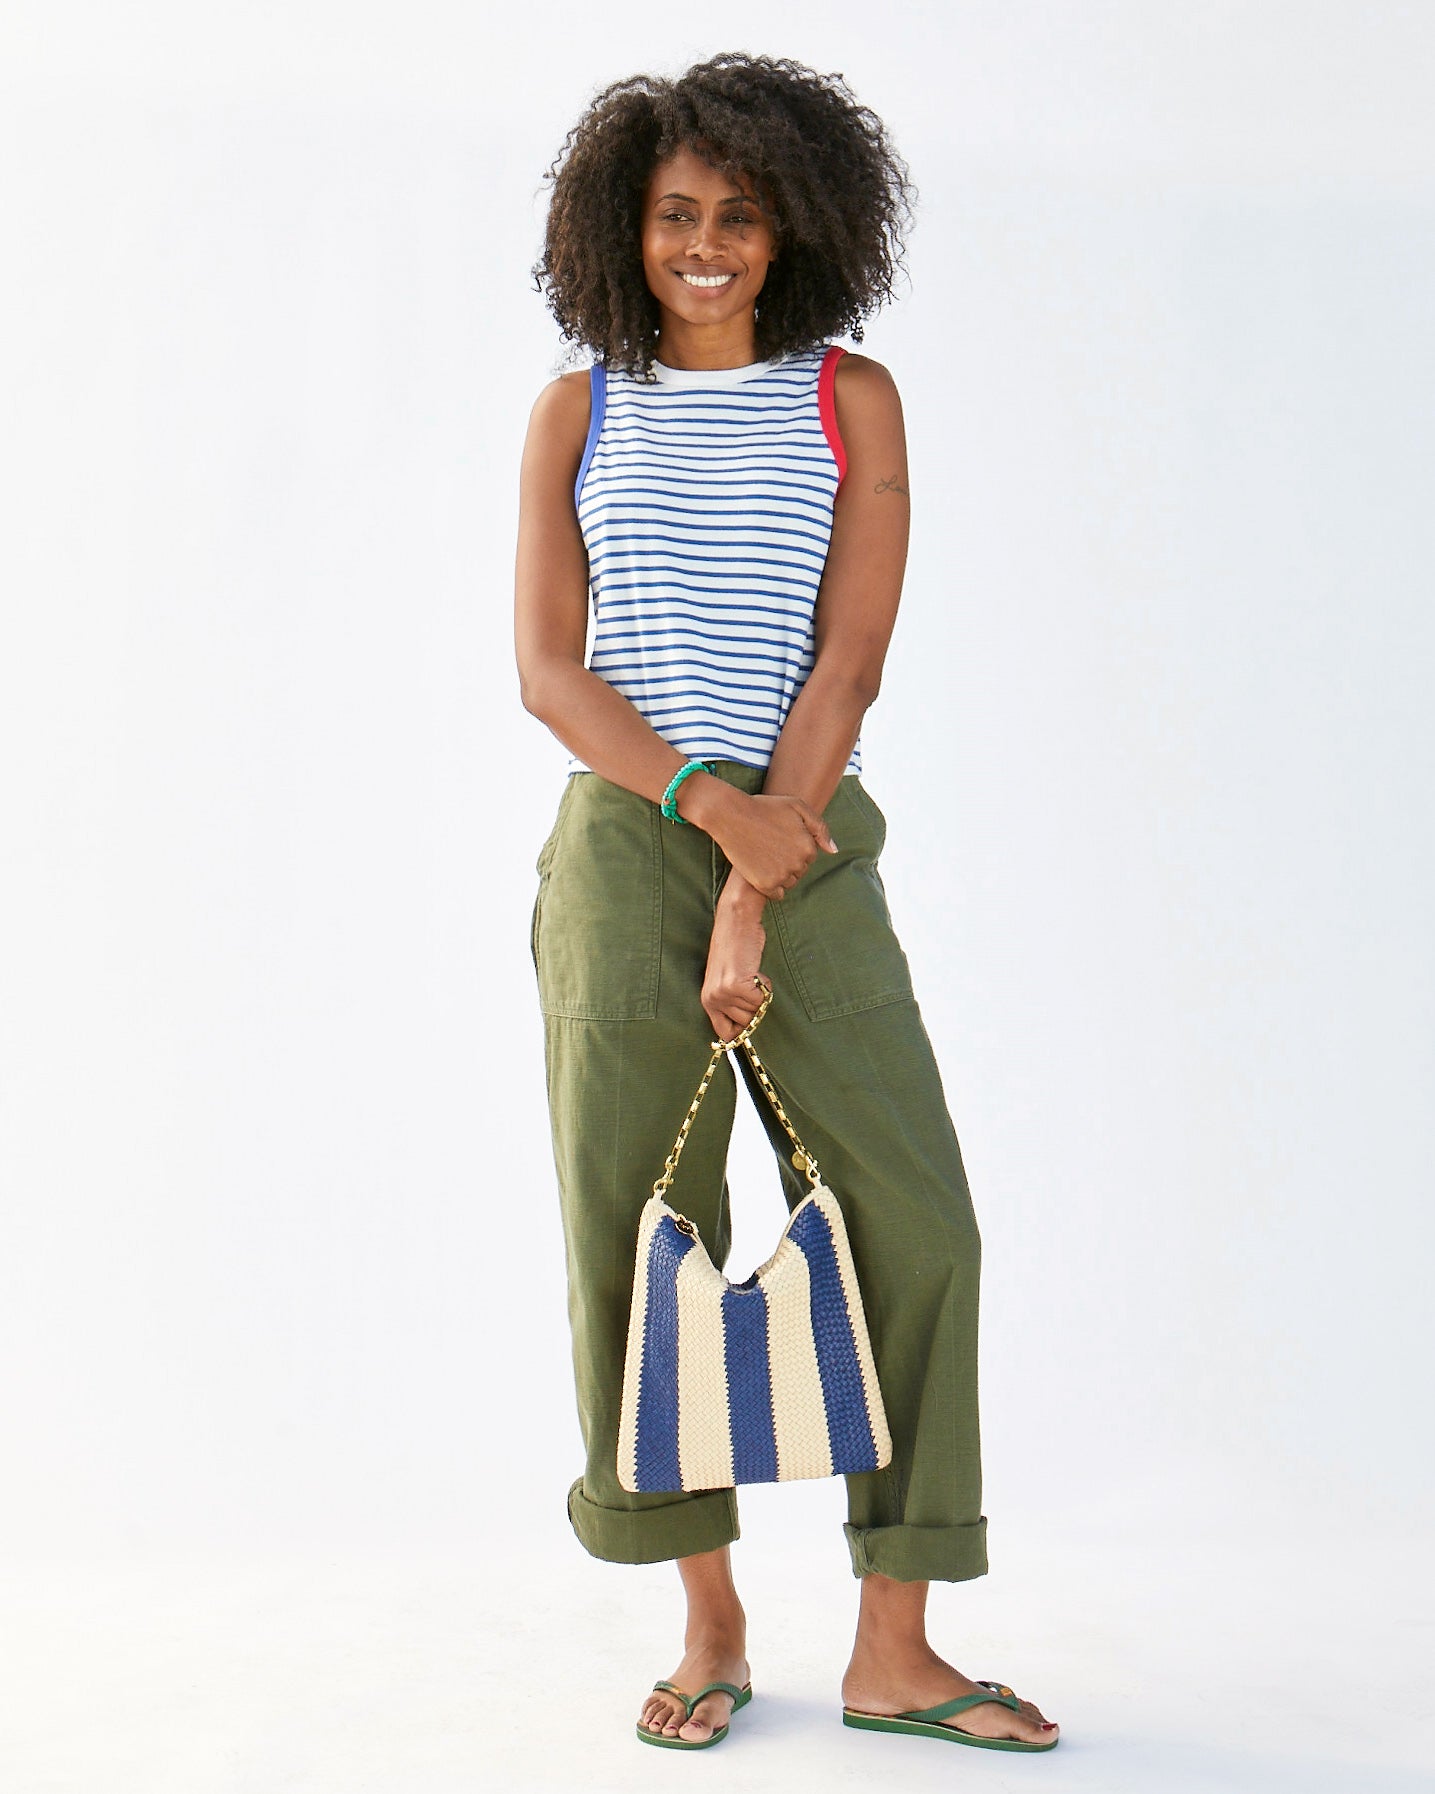 Mecca holding the Indigo & Cream Woven Racing Stripes Foldover Clutch w/ Tabs by the Box chain shoulder strap in front of her army colored pants